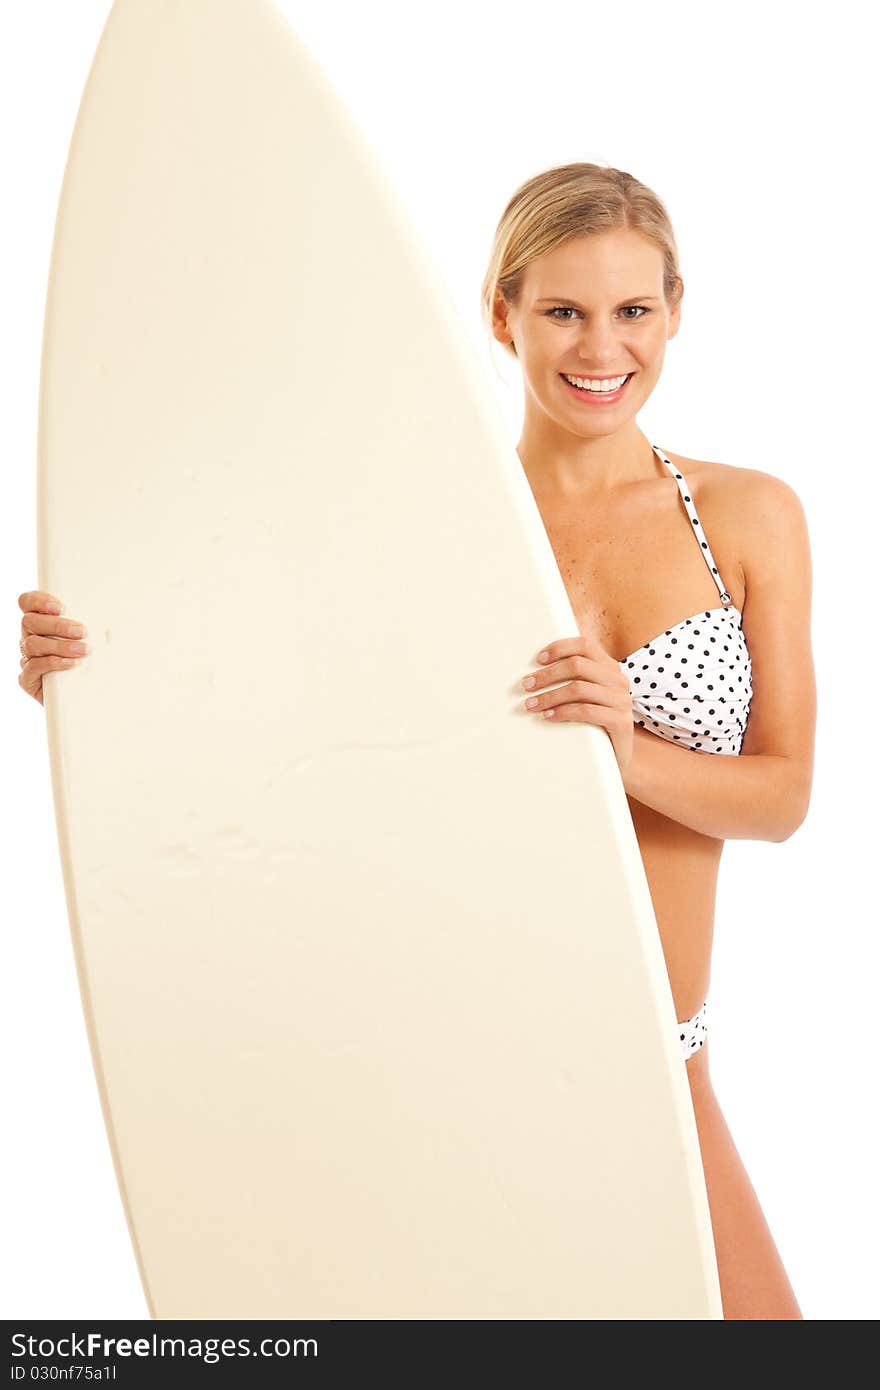 Close up portrait of young woman holding surfboard. Close up portrait of young woman holding surfboard